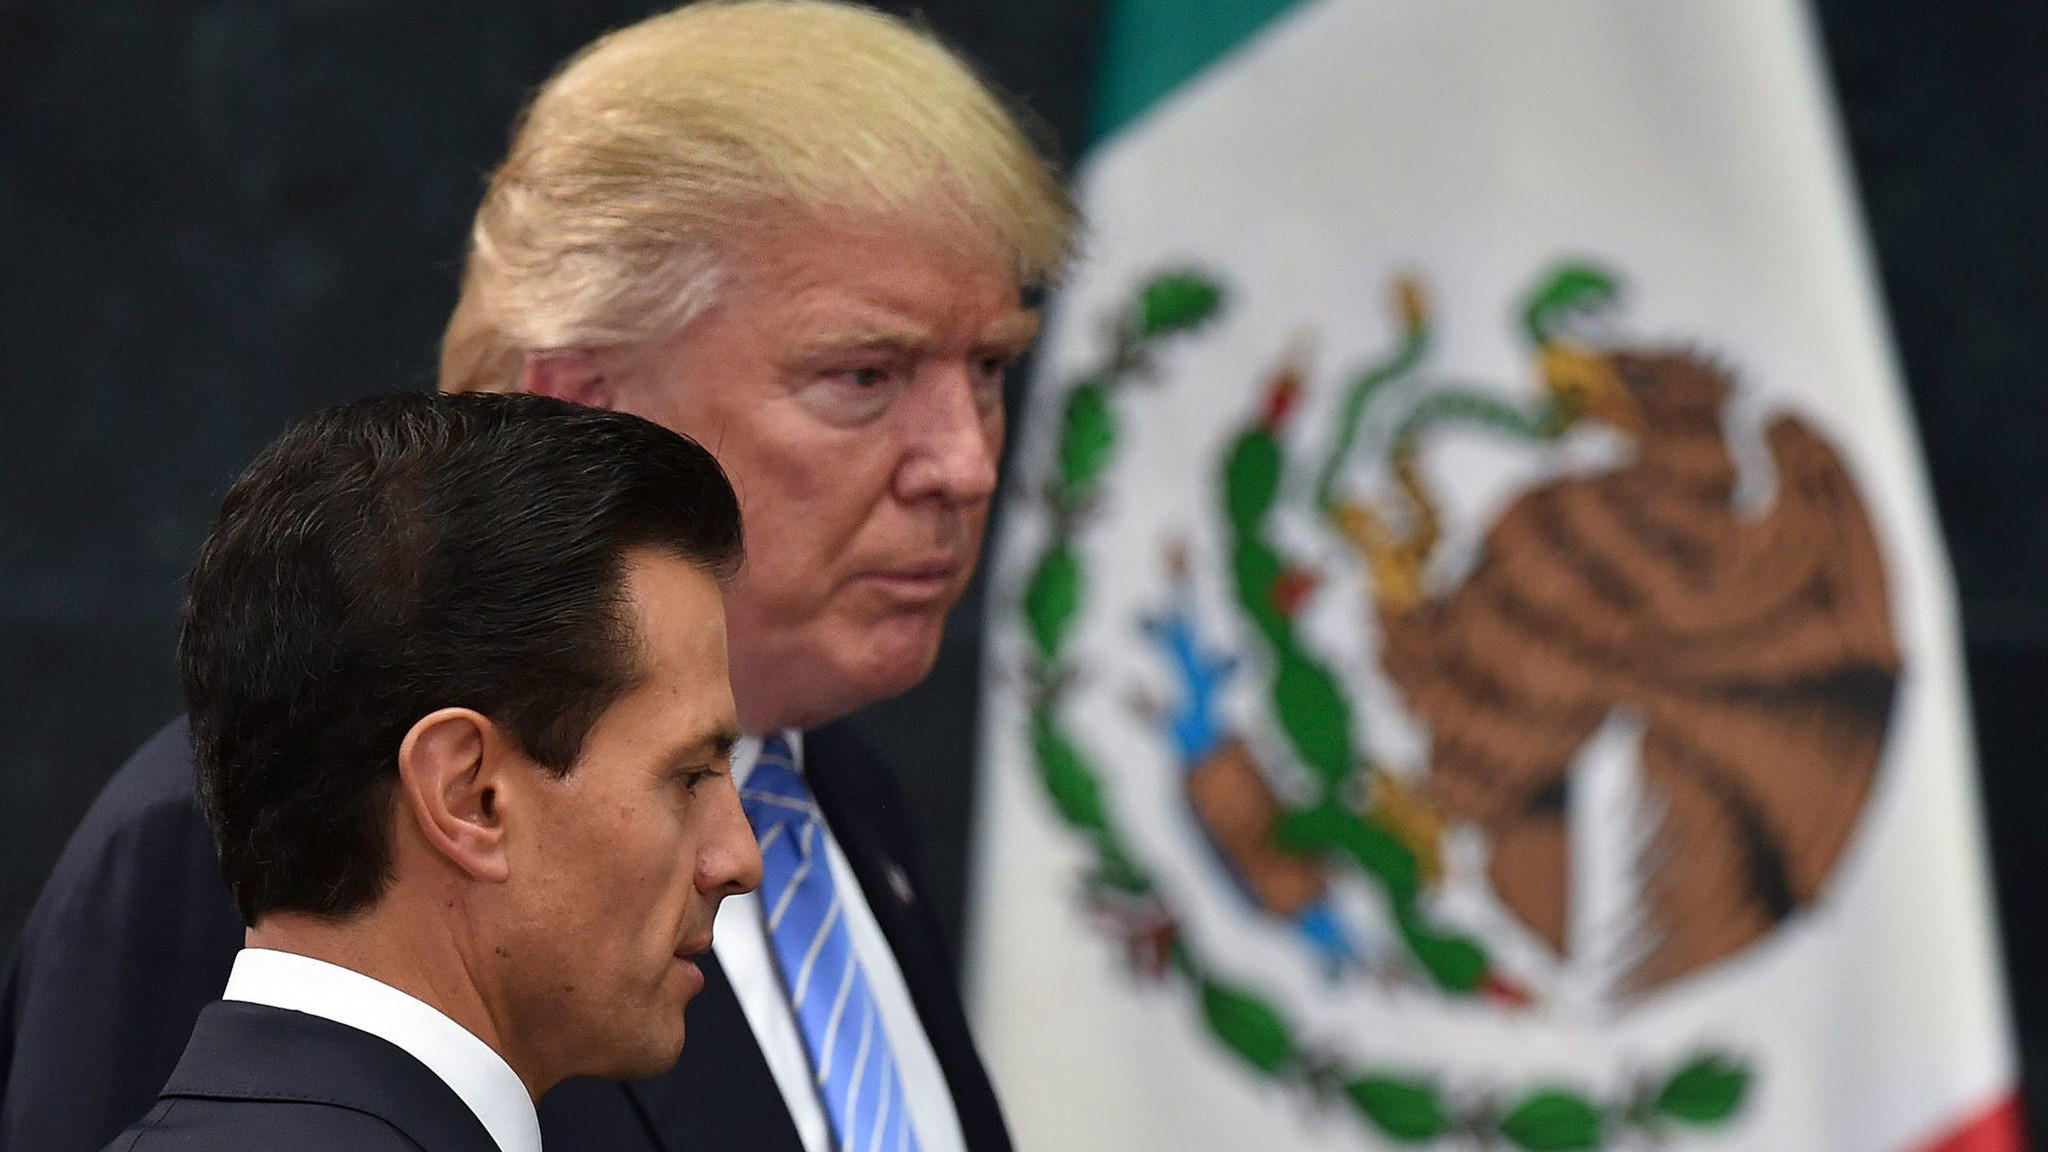 Mexican President Enrique Pea Nieto and then-Republican presidential nominee Donald Trump prepare to take the stage at a joint news conference in Mexico City in August.